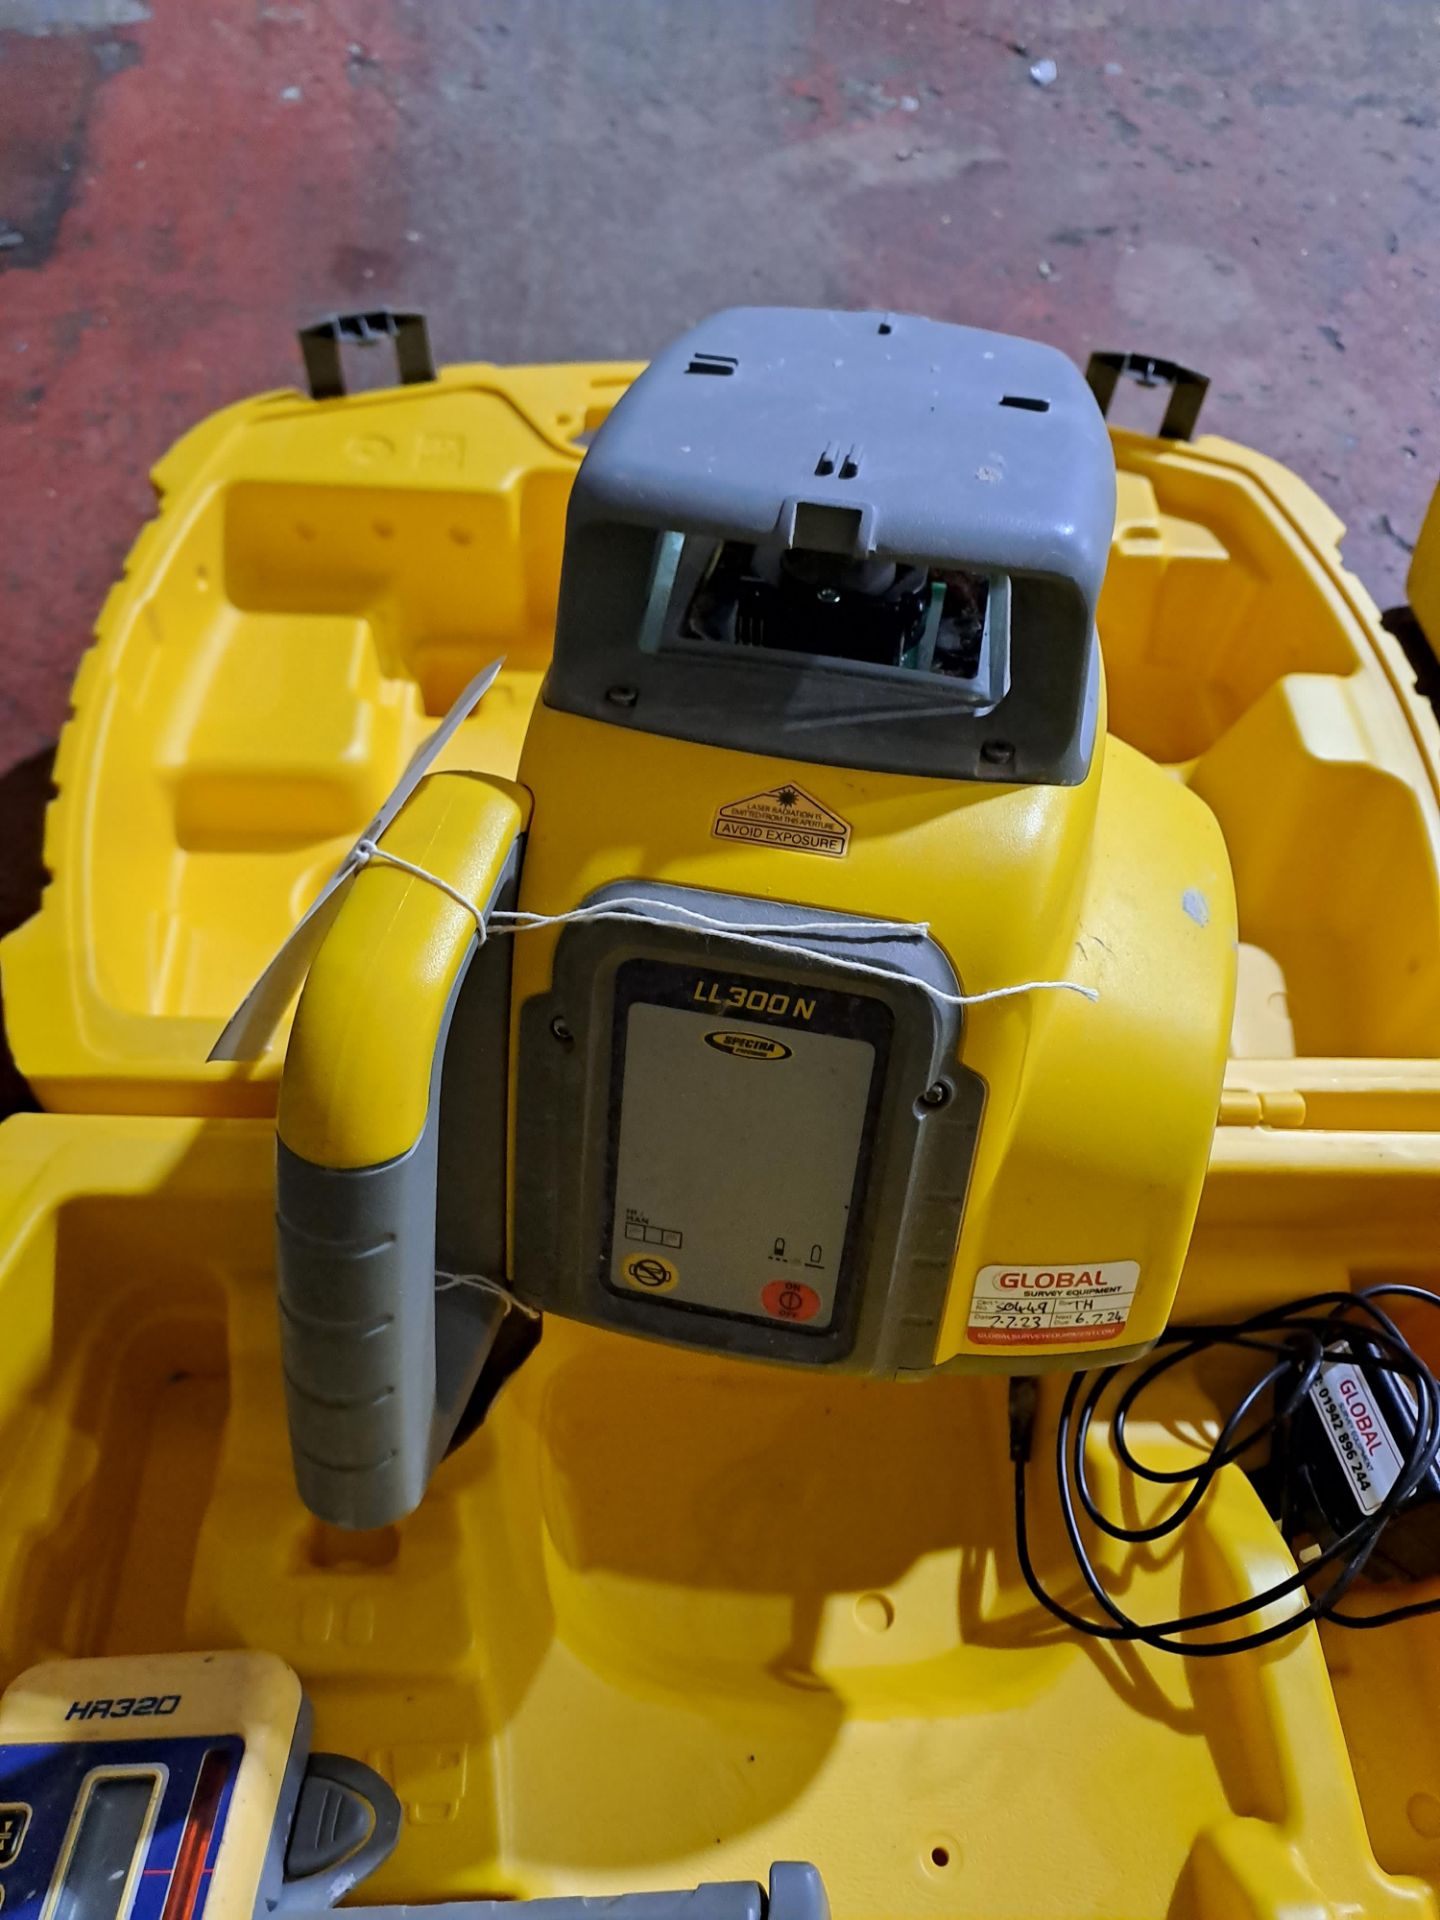 Trimble LL300N Spectra Precision laser level, serial no. 21173427, with Trimble HR320 detector, - Image 2 of 3